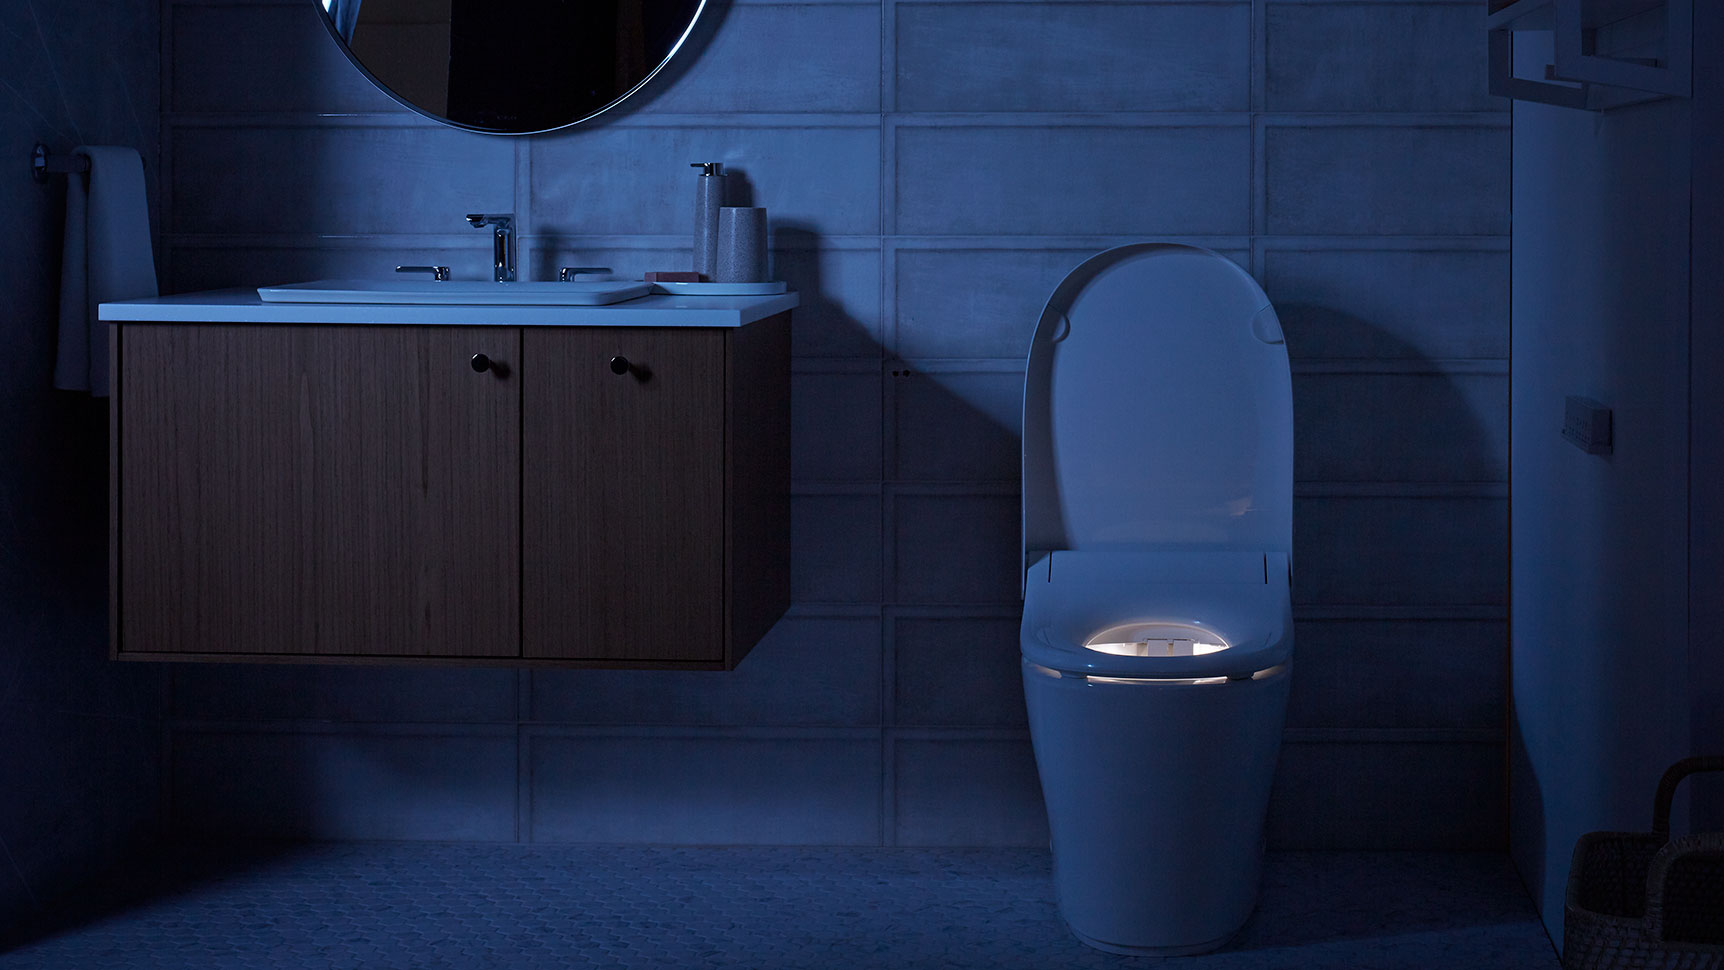 The Innate Intelligent Toilet also apparently doubles as a night light. (Image: Kohler)